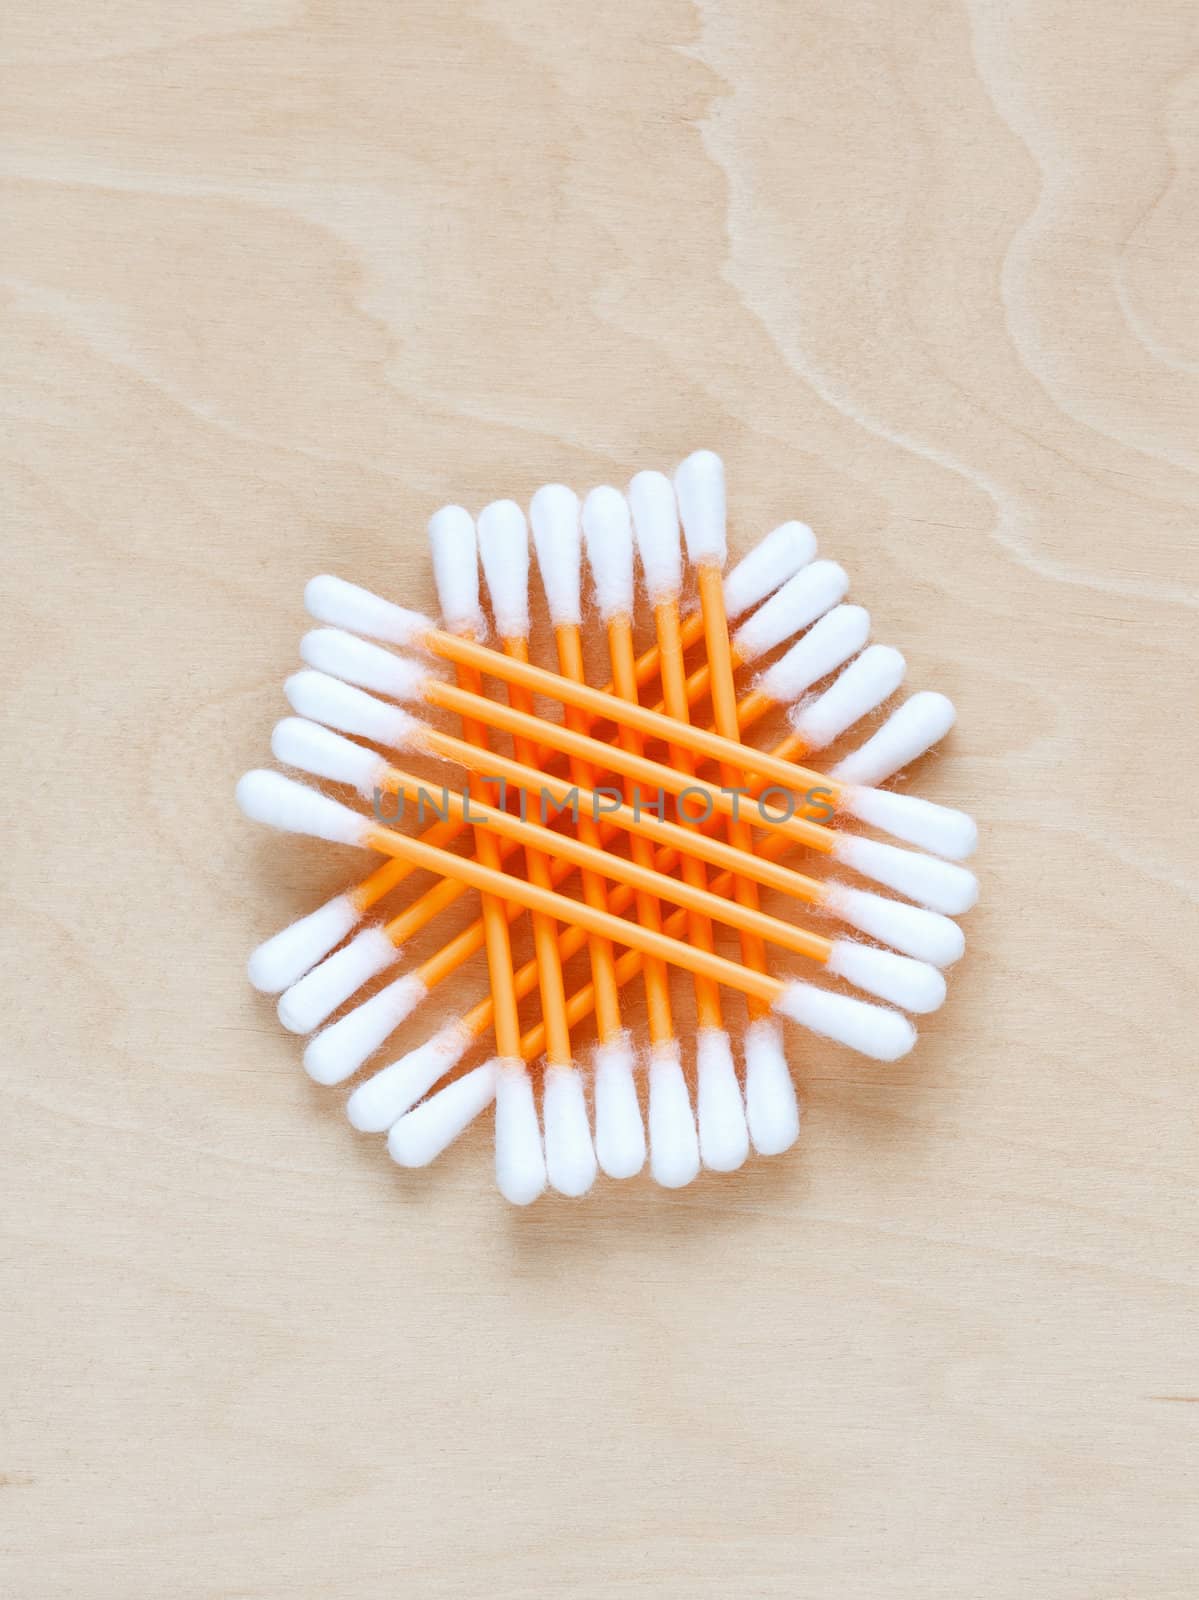 Ear sticks scattered on a table